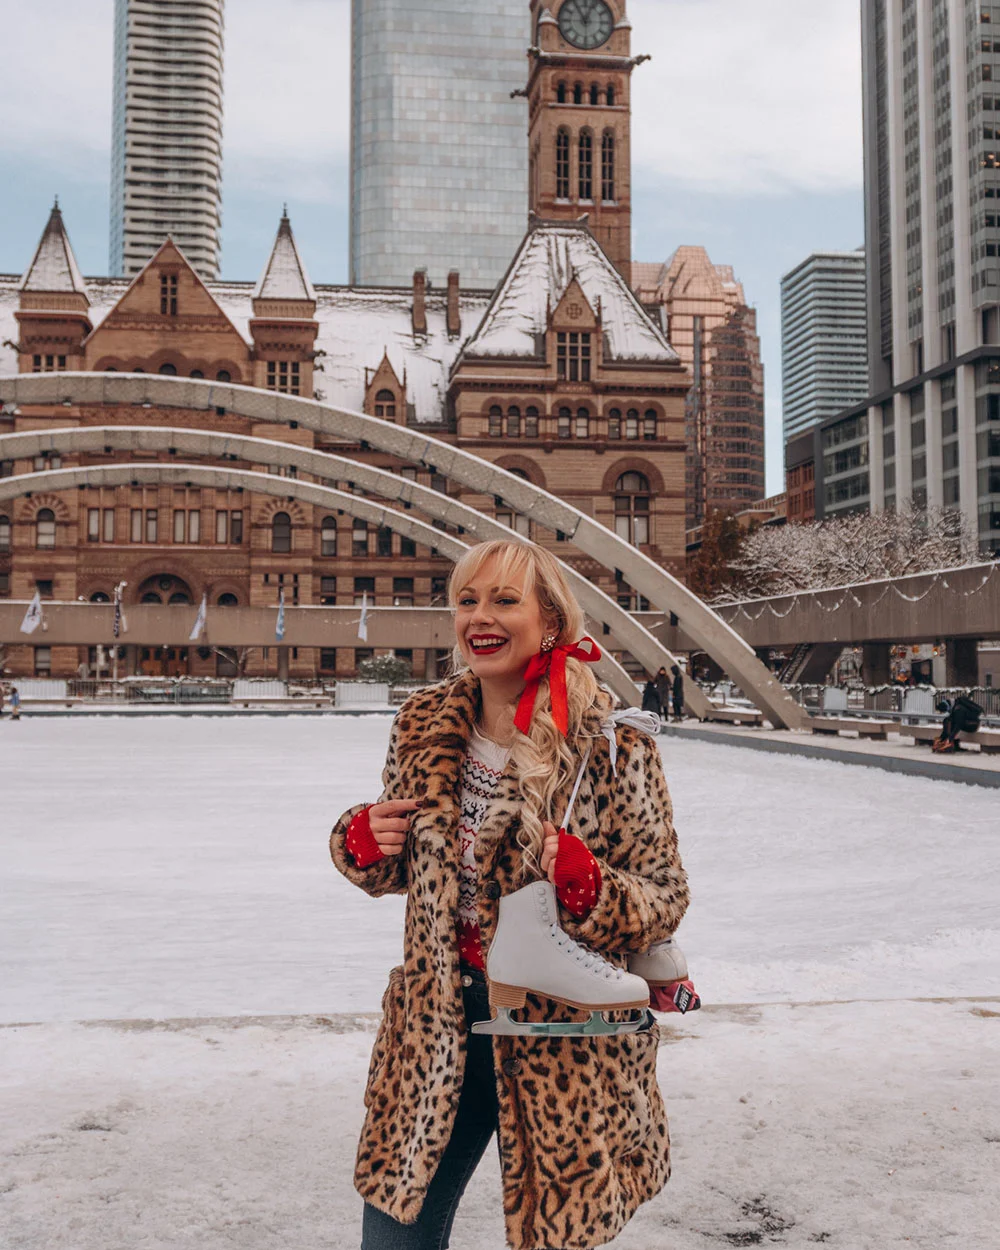 Looking for some cheap & free things in Toronto at Christmas time? This guide is for you! Toronto has so many incredibly fun & festive yet affordable activities to do during the Christmas season. From the Santa Claus parade to magical light displays, this guide includes all of the free and cheap activities to do in Toronto this holiday season. Pictured here: Skating at Nathan Phillips Square